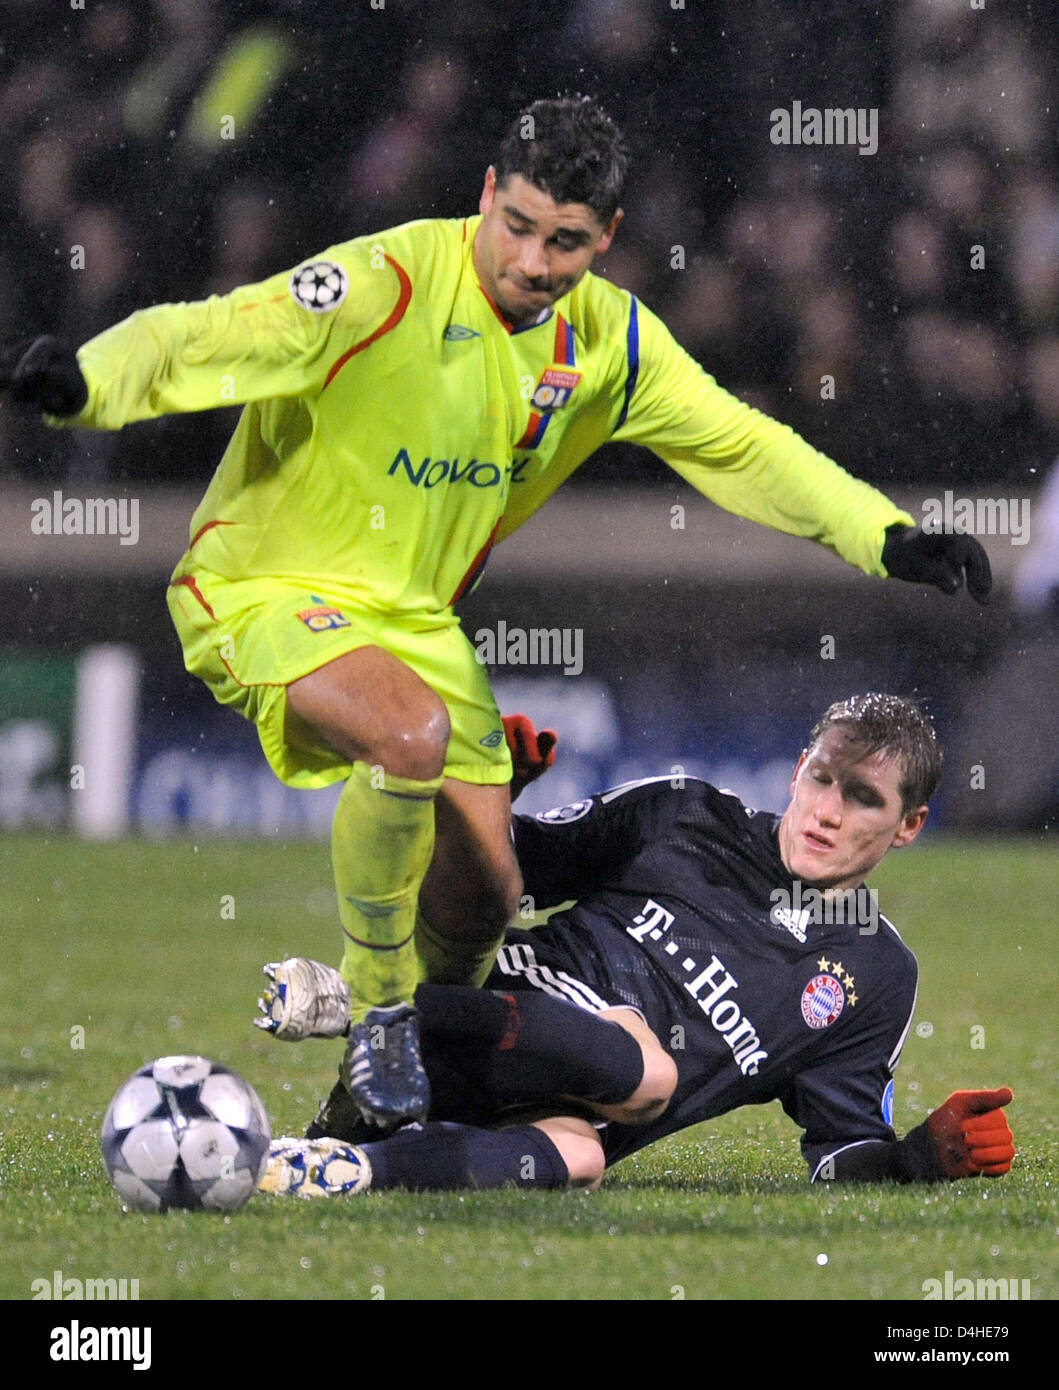 Ederson (L) of Olympique Lyon vies for the ball with Bastian Schweinsteiger of FC Bayern Munich during the Champions League Group F match at Stade de Gerland in Lyon, France, 10 December 2008. Bayern Munich defeated Lyon 3-2 securing the first place in UEFA Champions League Group F. Photo: Andreas Gebert Stock Photo